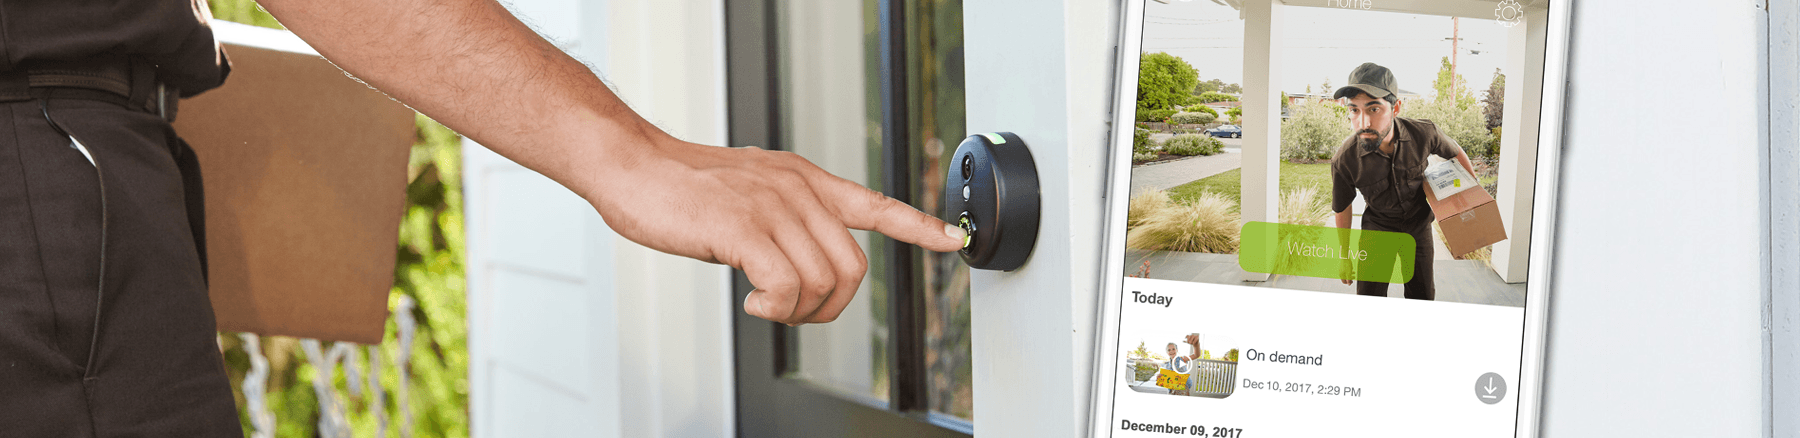 A doorbell camera can be a real game changer.